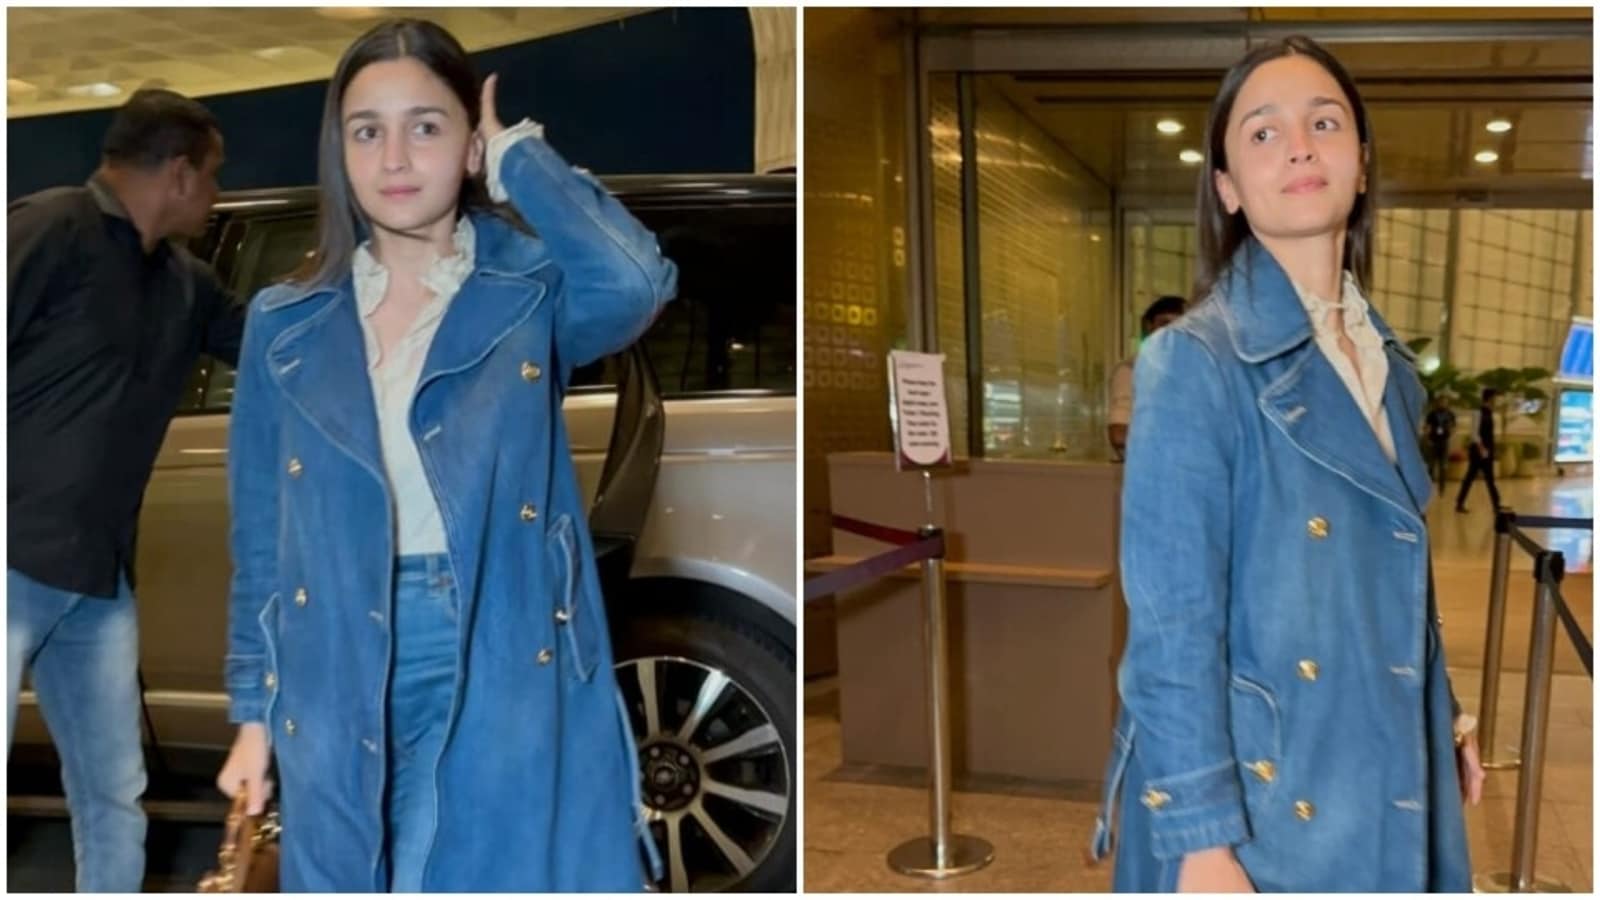 Alia Bhatt Travels to Seoul to Attend Gucci Cruise Show, Slays Airport Fashion in Denim Outfit and No Makeup: WATCH |  Fashion trends